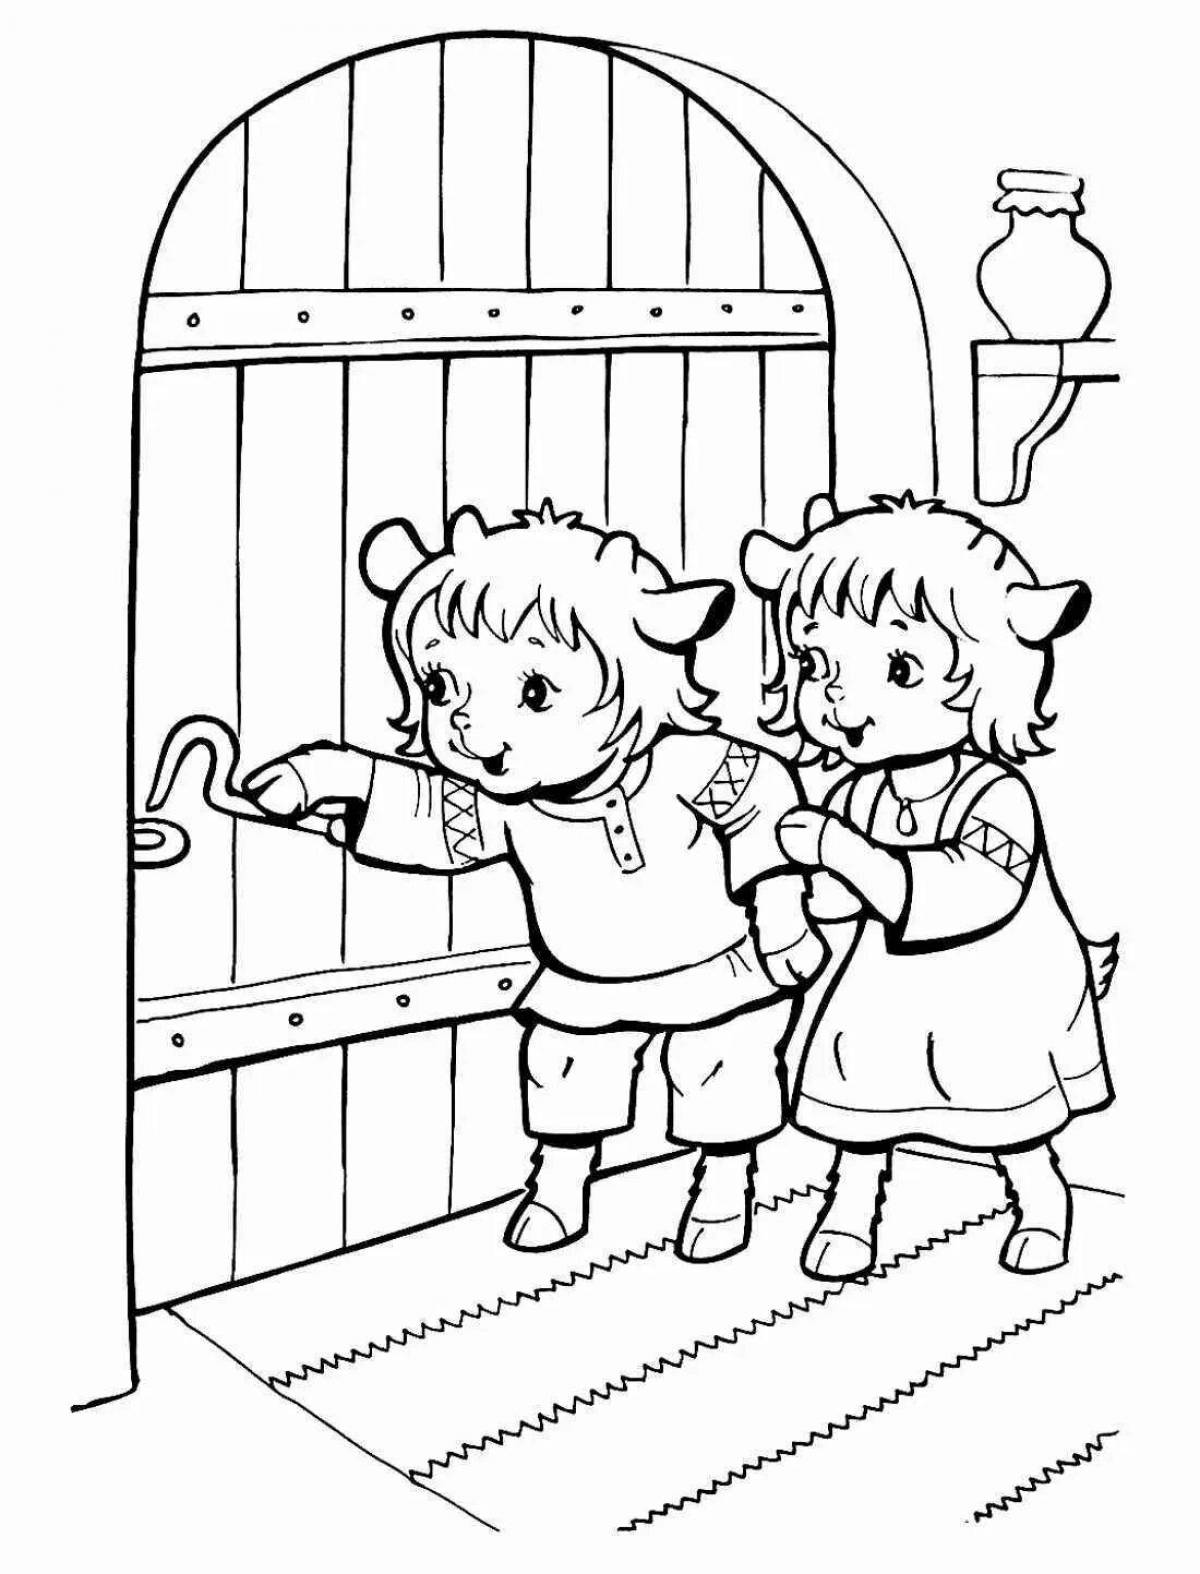 Coloring page adorable goat and seven kids